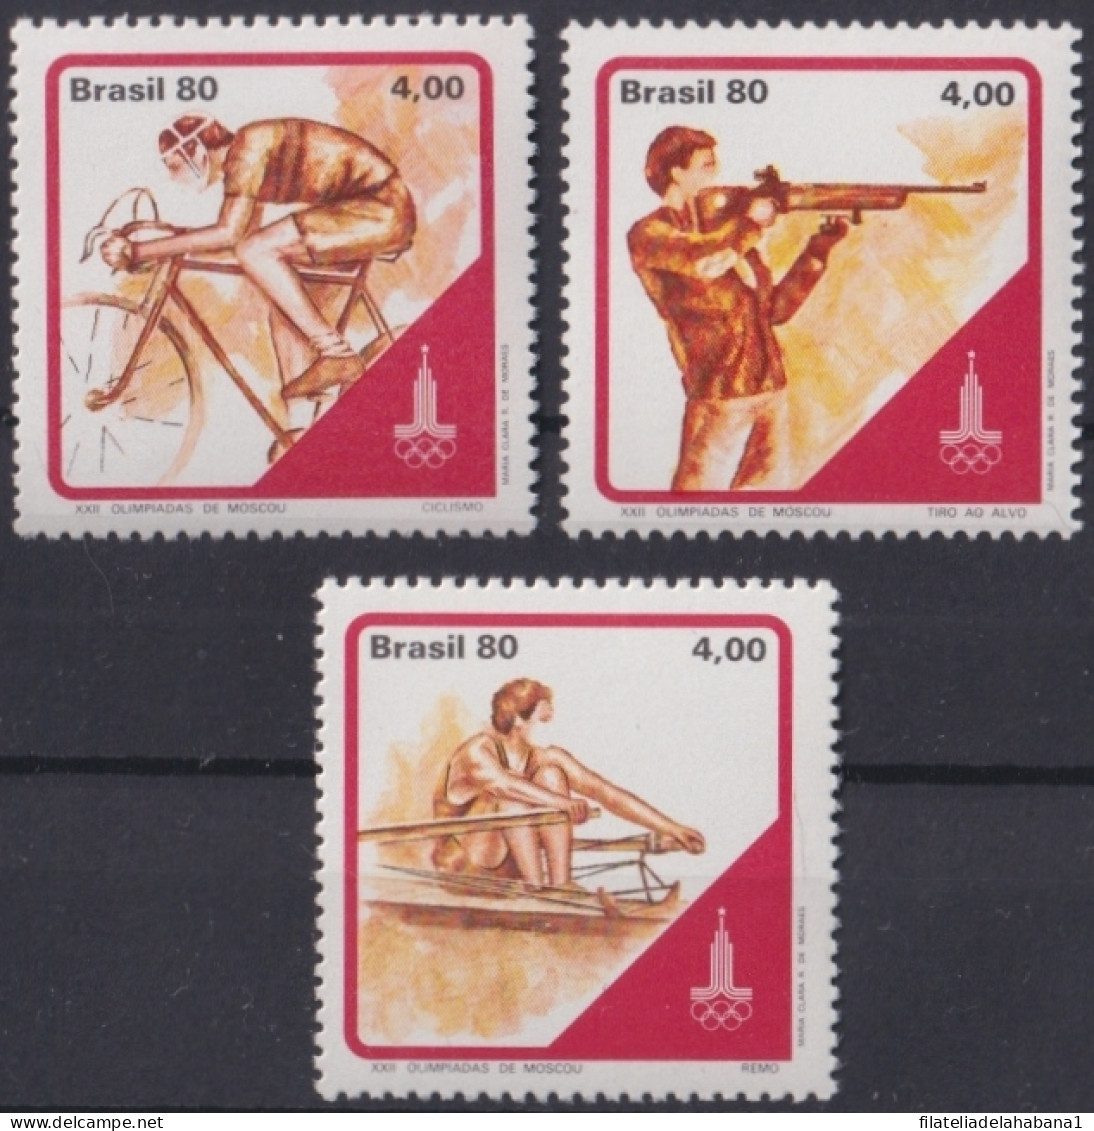 F-EX50074 BRASIL BRAZIL MNH 1980 MOSCOW OLYMPIC GAMES CICLING SHOOTING ROWS.  - Sommer 1980: Moskau